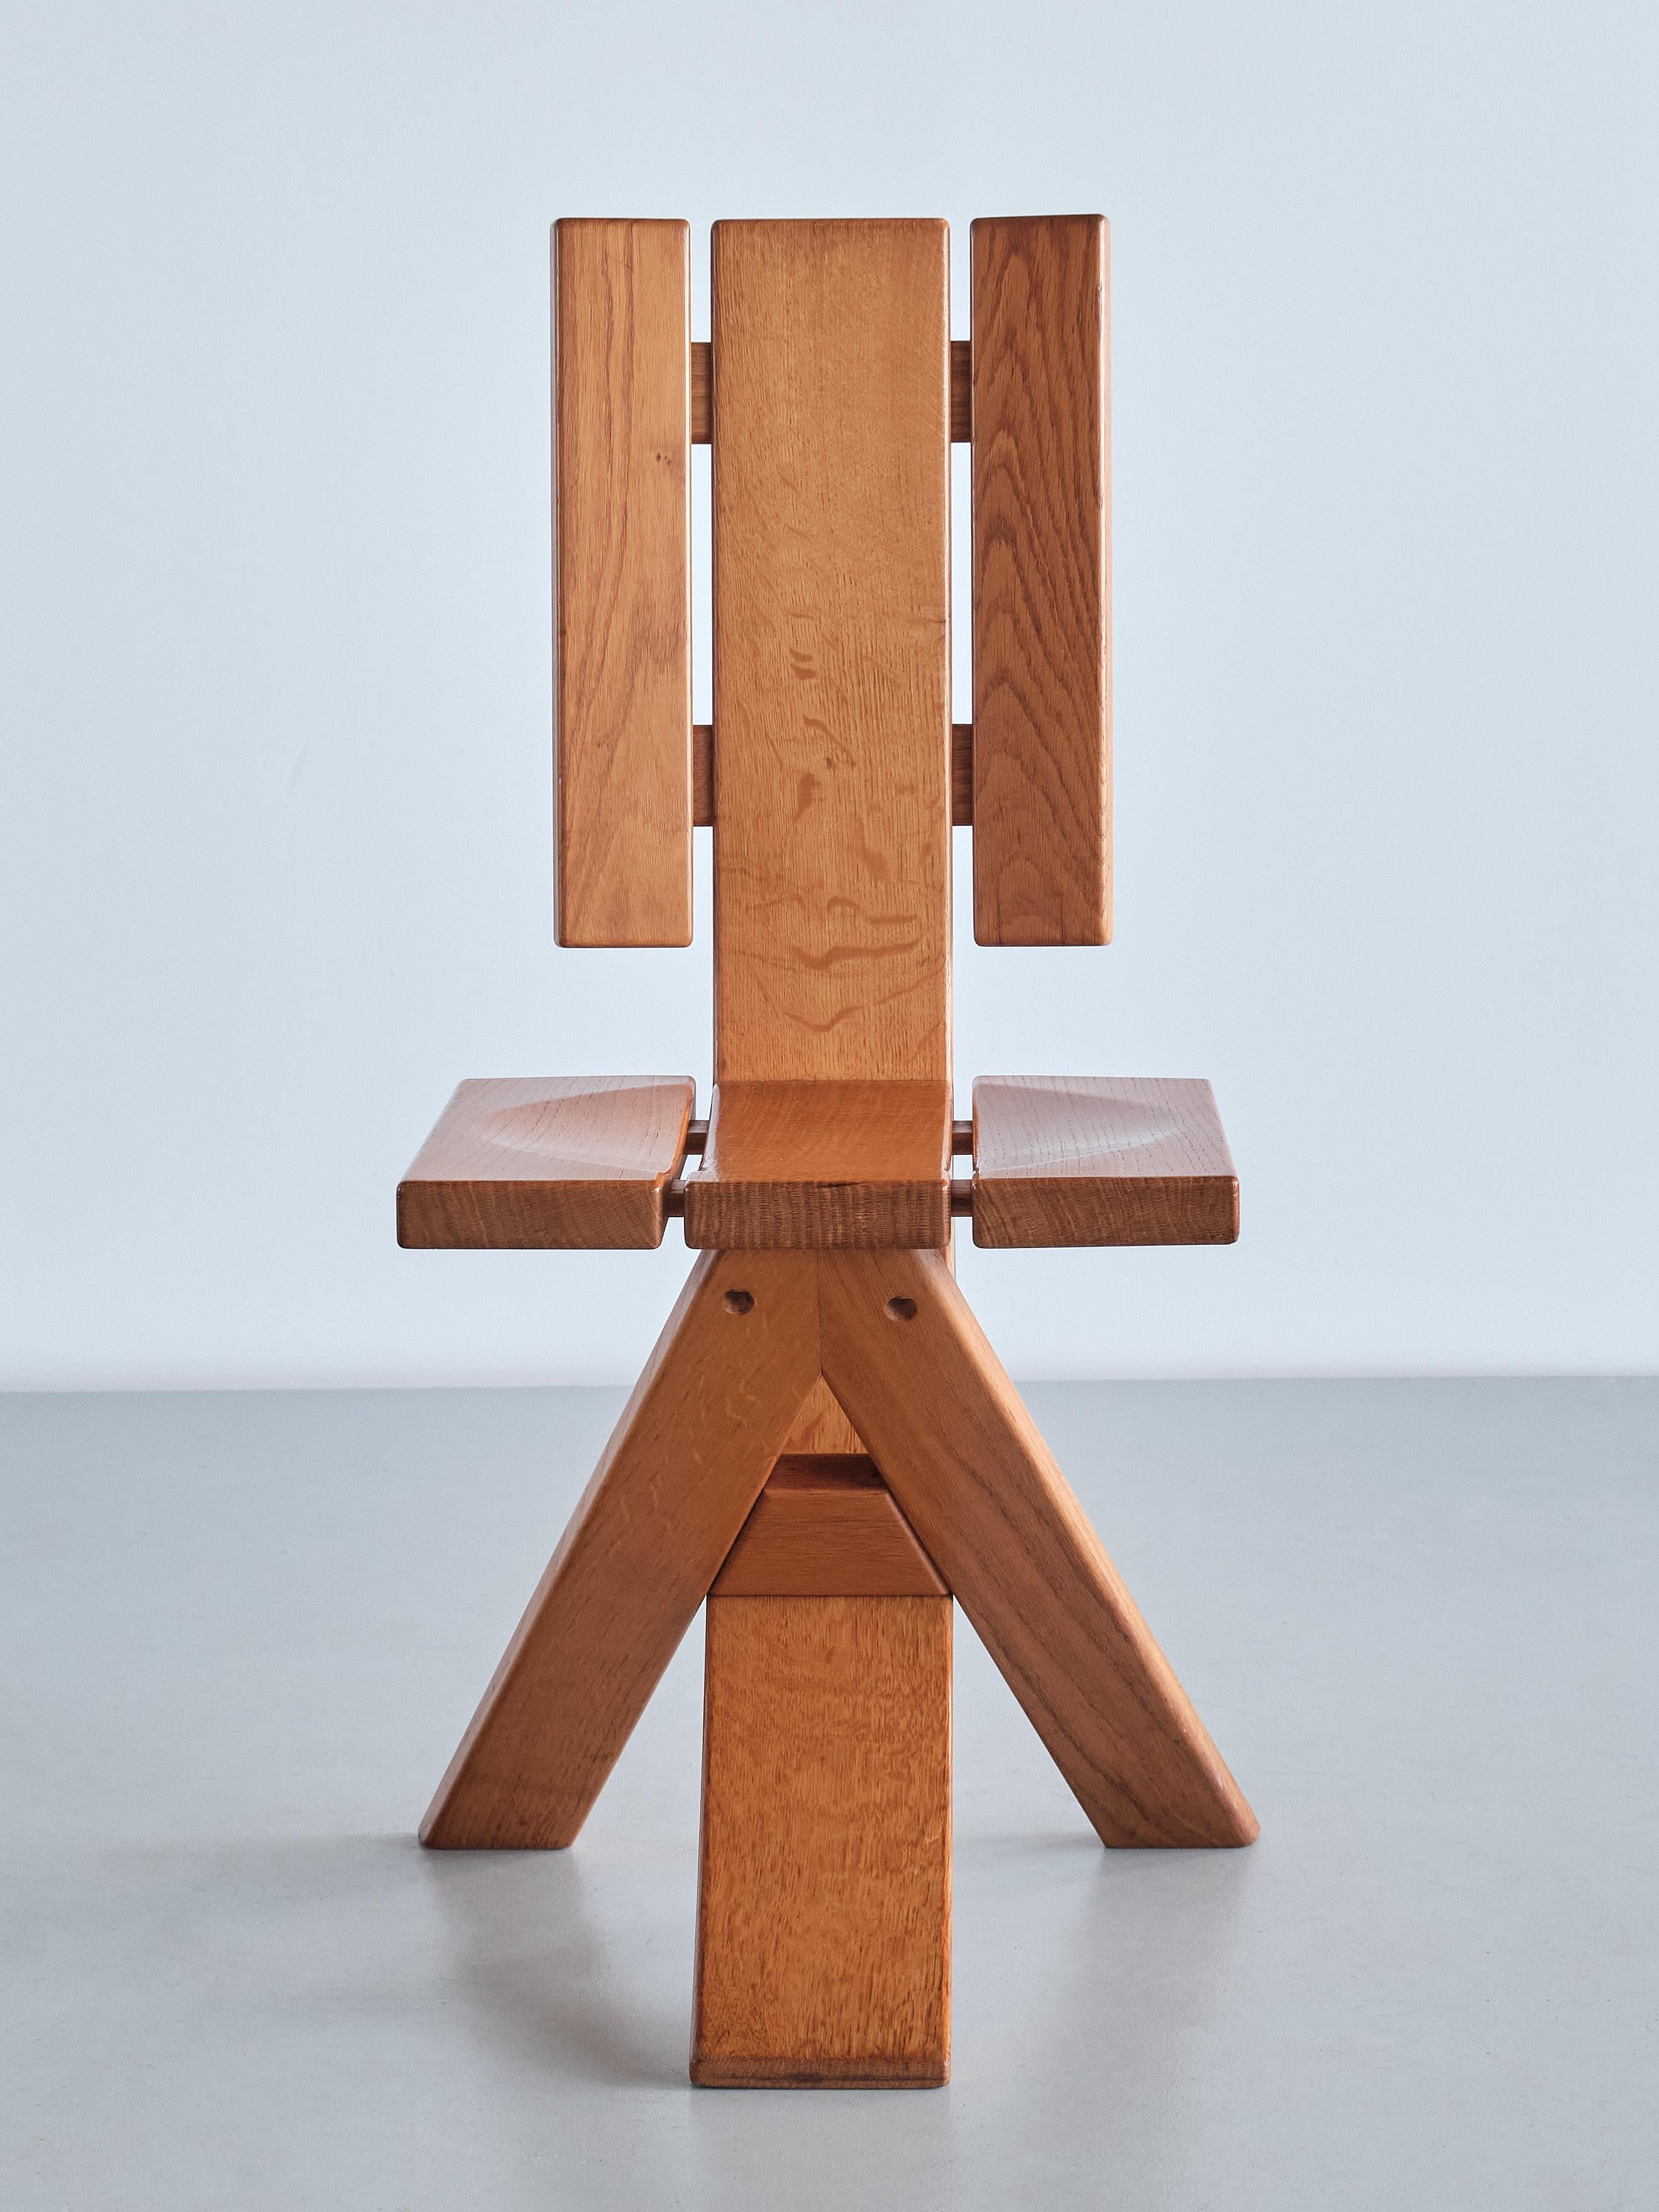 French Sculptural Set of Four Ebénisterie Seltz Dining Chairs in Oak, France, 1970s For Sale